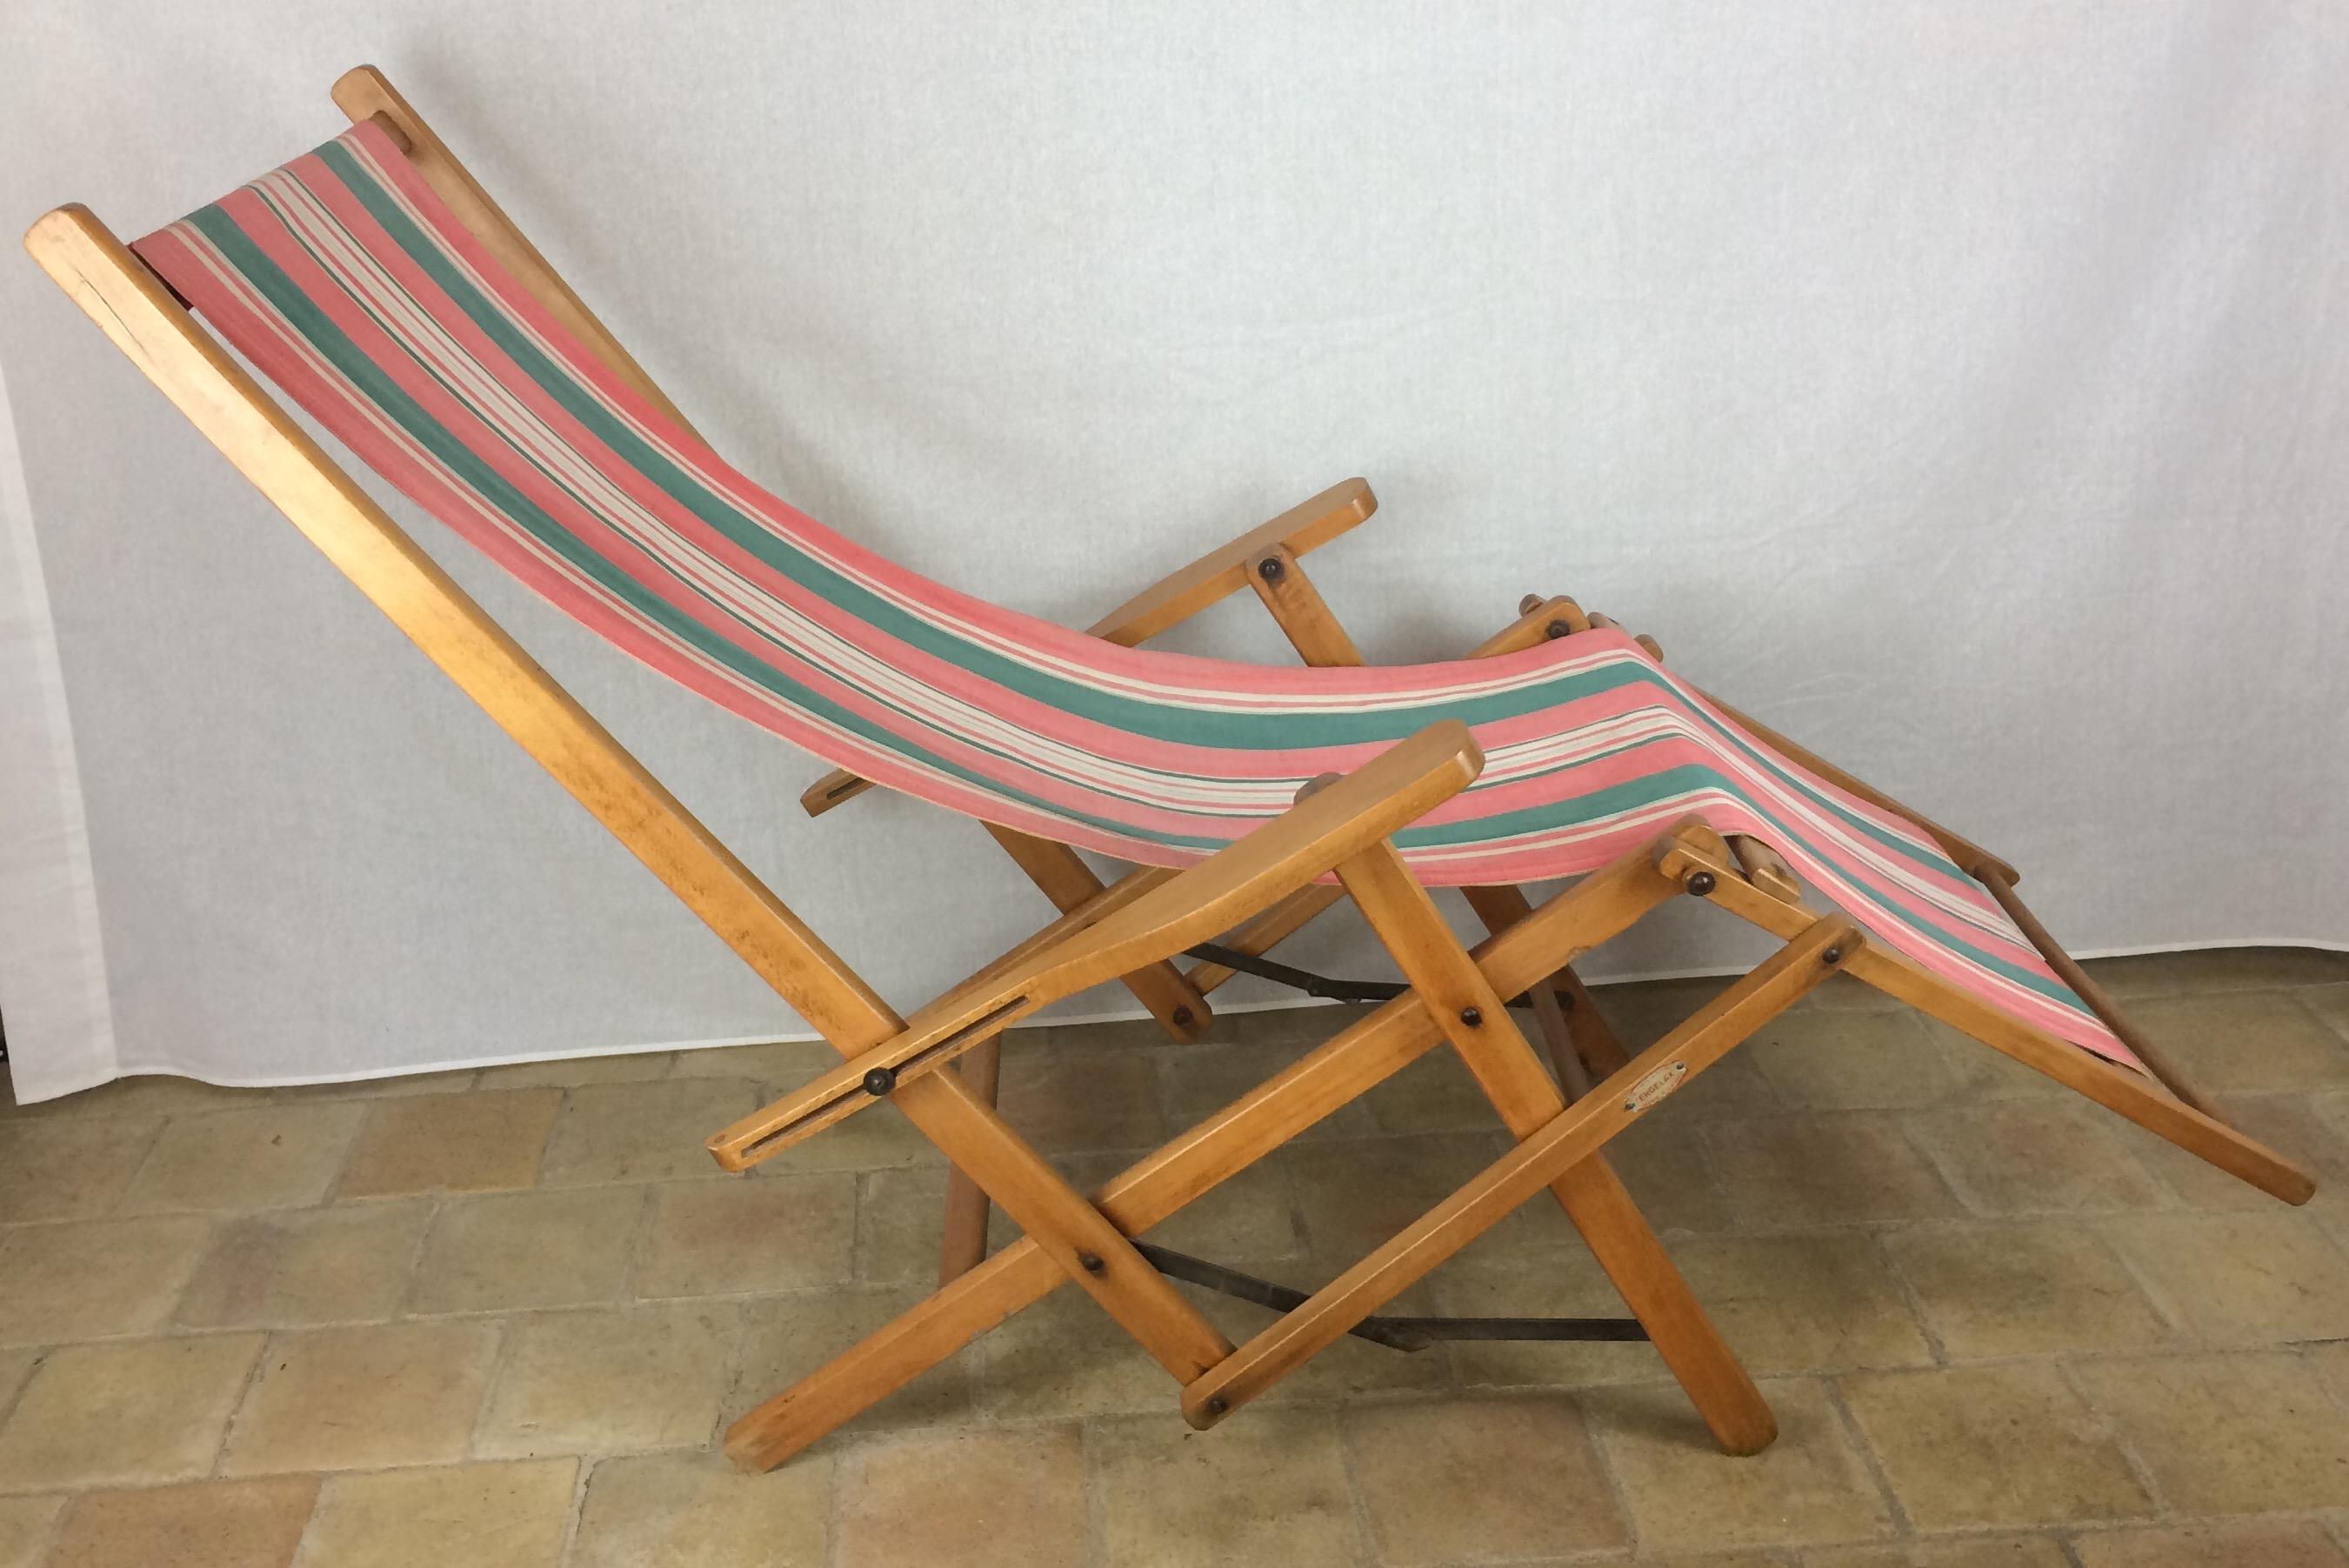 1950s American folding canvas ERGELAX lounge chair designed by R. Gleizes For RG. True Americana style. 

Very unique and rare vintage American folding canvas lounge chair. Removable canvas for easy cleaning. Sturdy enough for daily use, made in